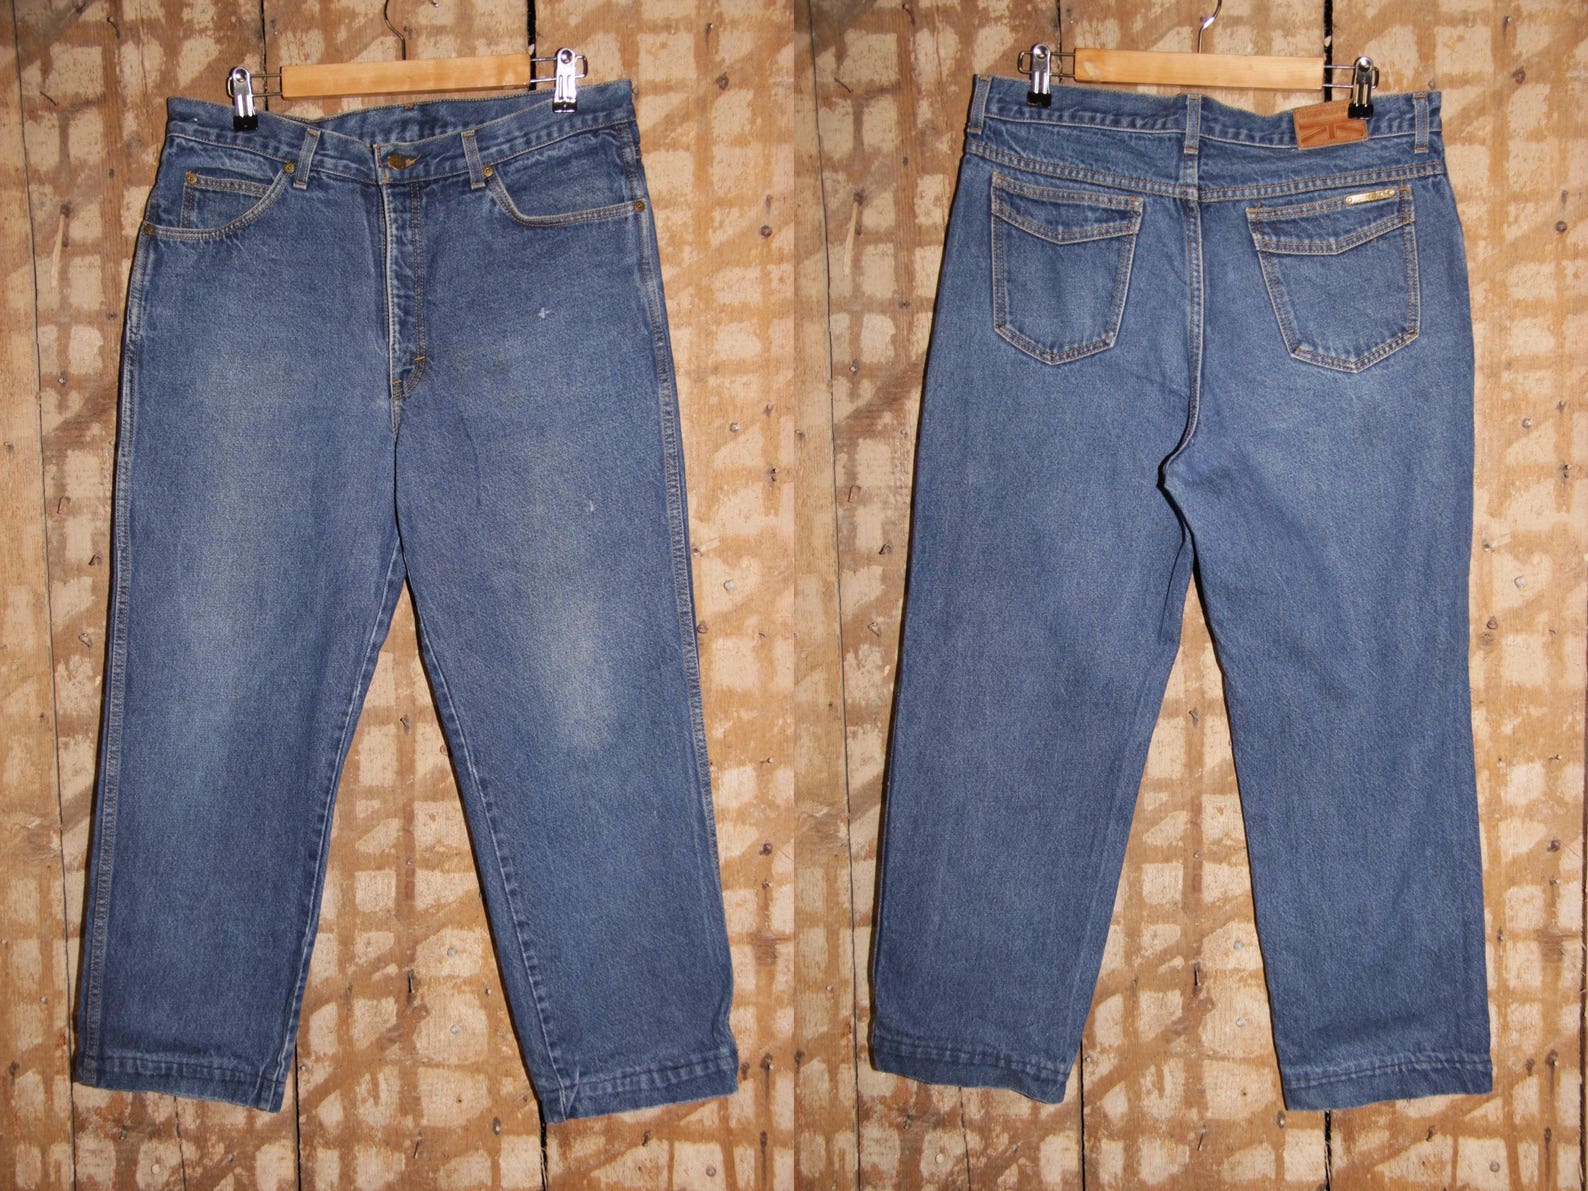 Vintage BRITTANIA Jeans 36 Waist Jeans High Waisted Jeans - Etsy